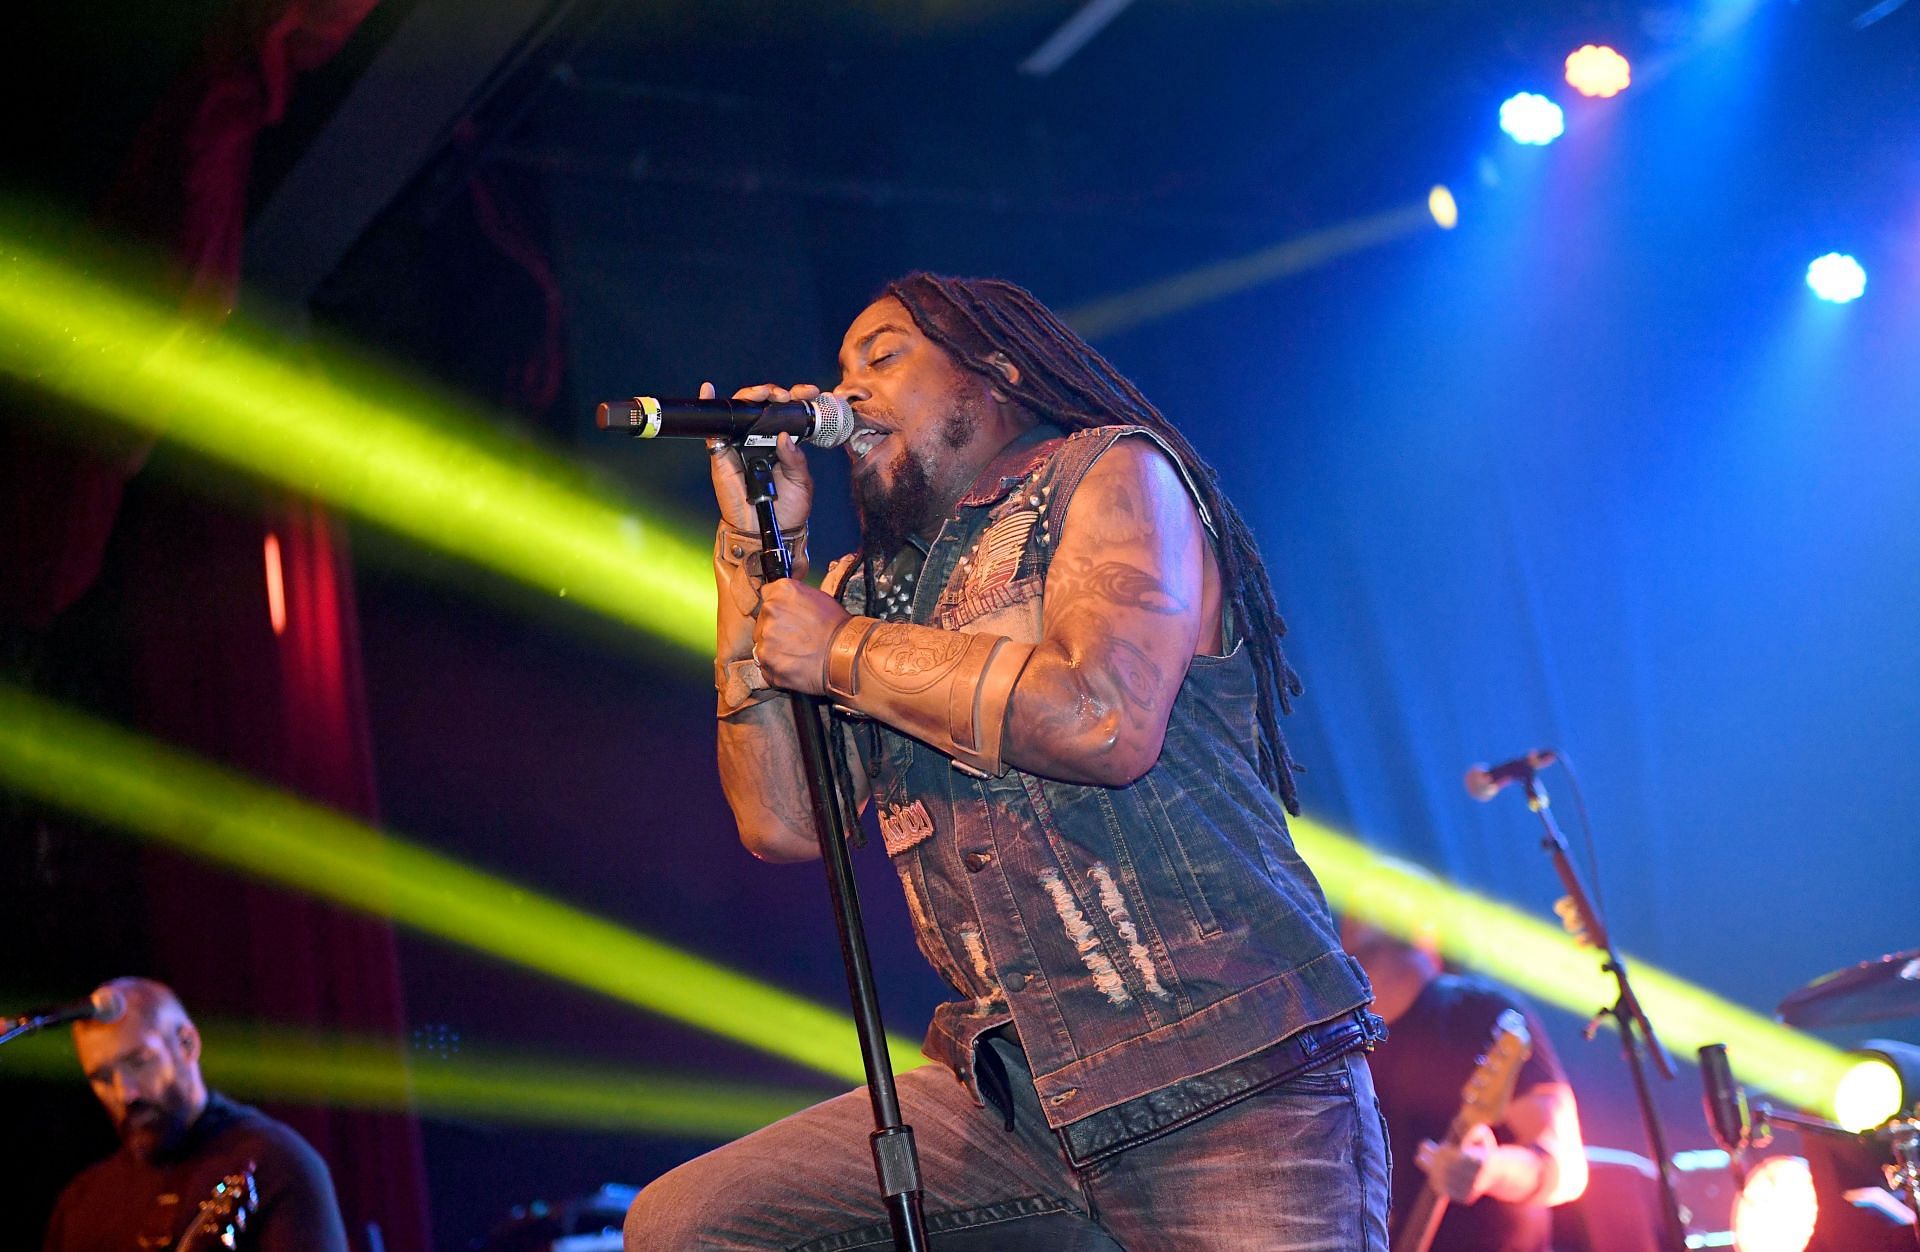 Sevendust In Concert At The Marquee Theatre